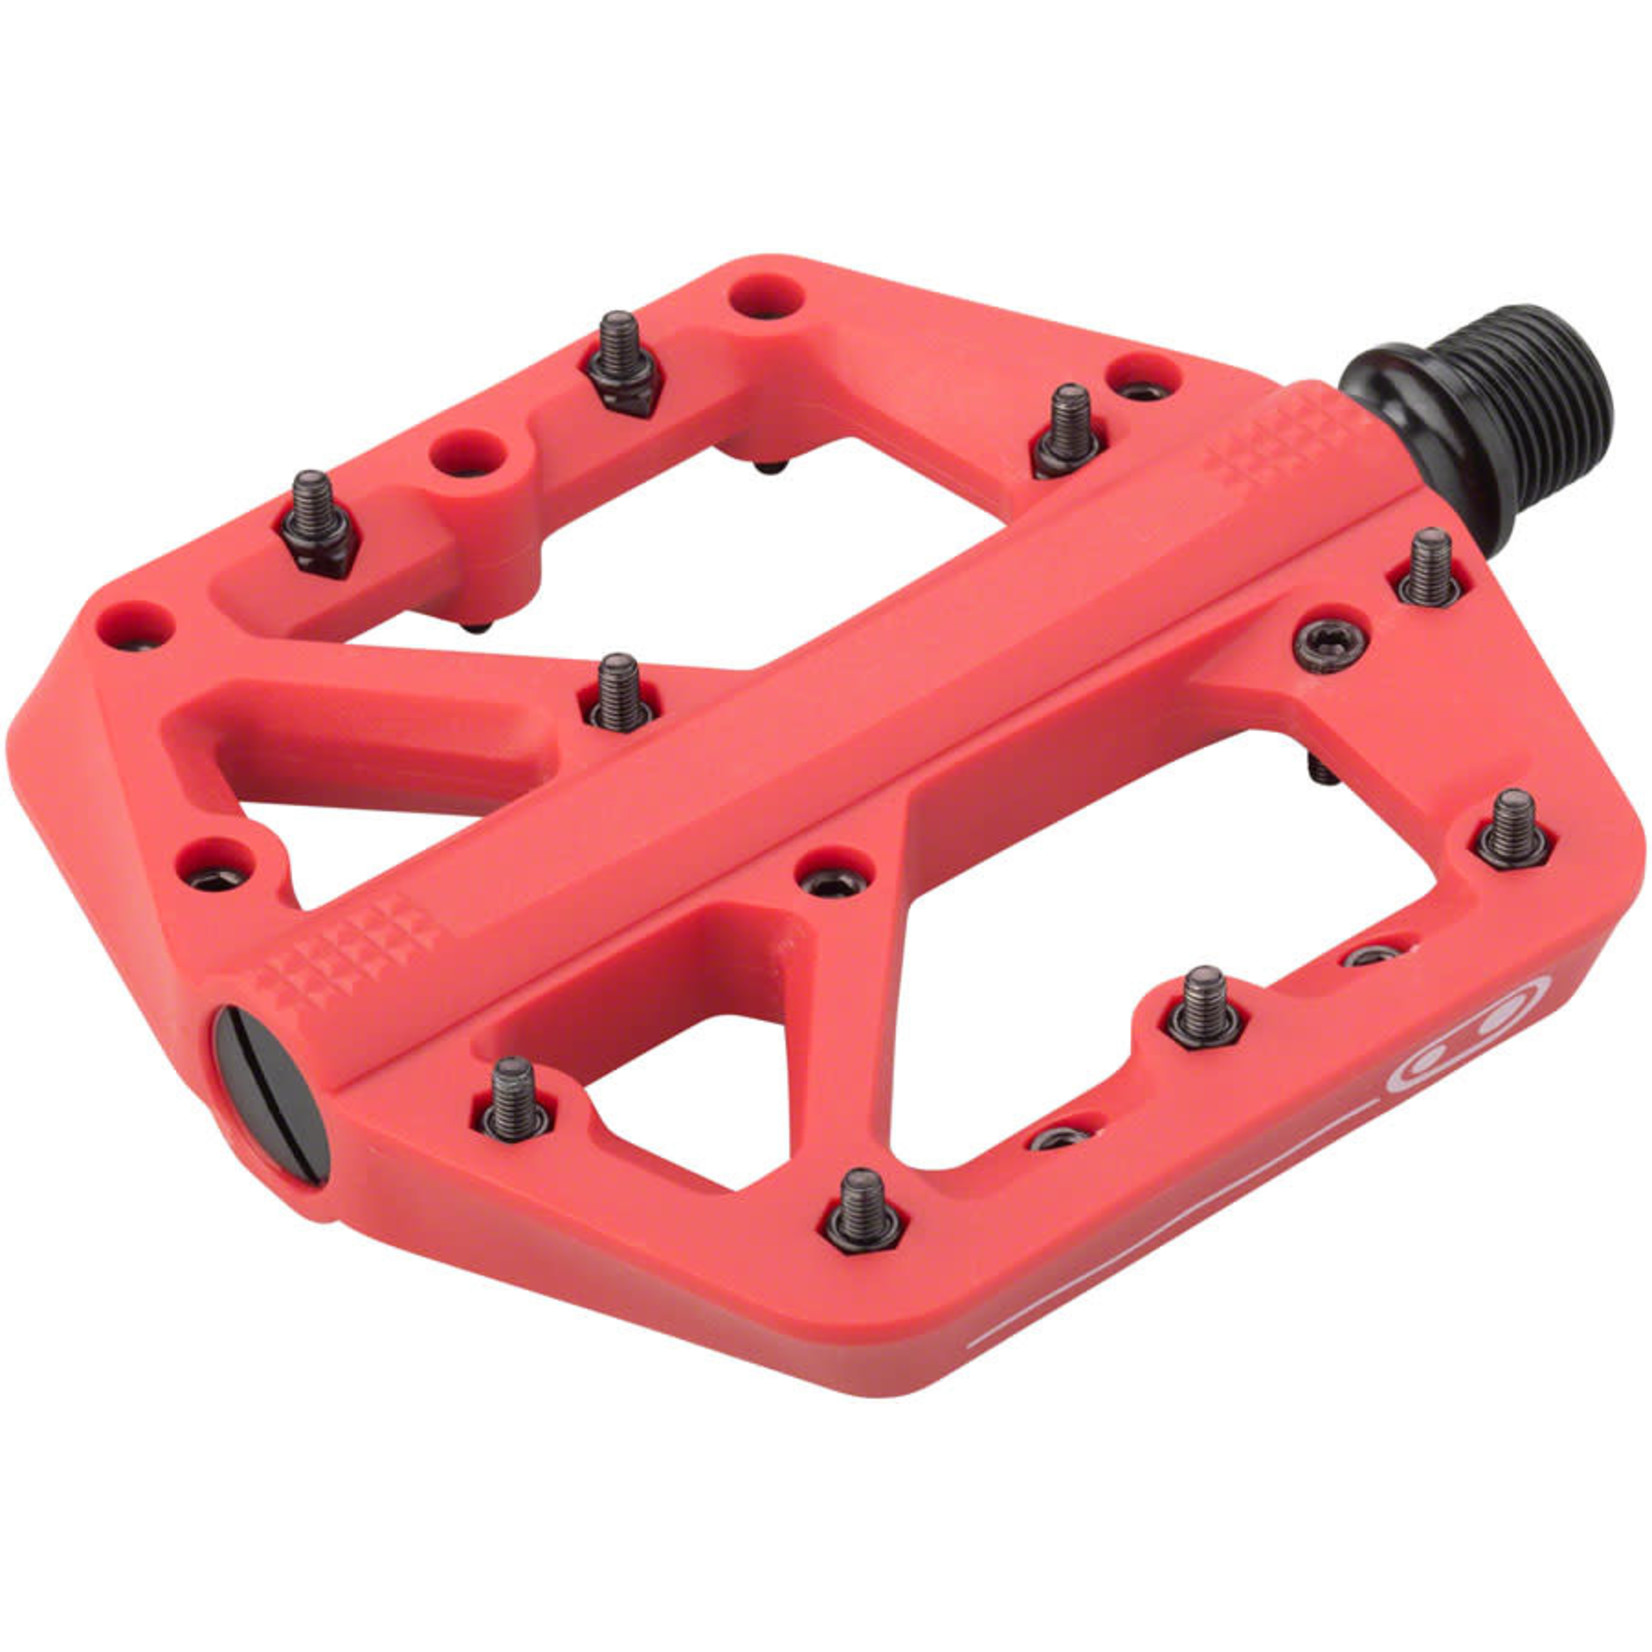 Crank Brothers Crank Brothers Pedal Stamp 1 Large Red